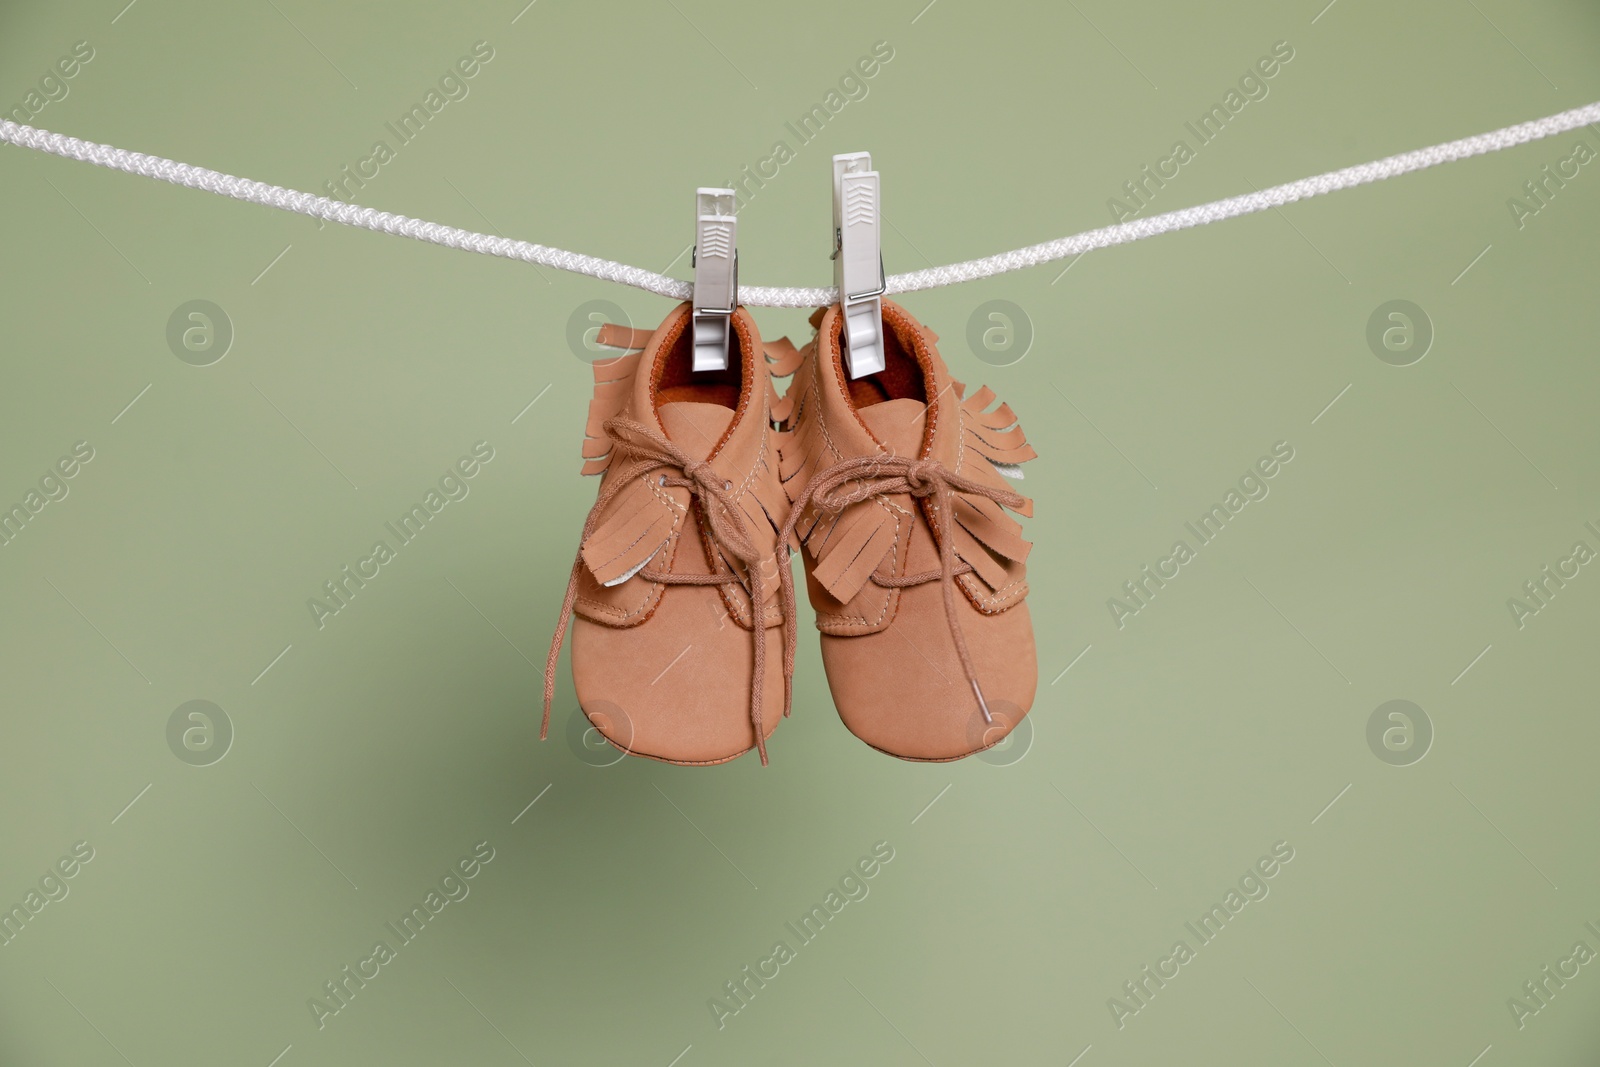 Photo of Cute small baby shoes hanging on washing line against green background